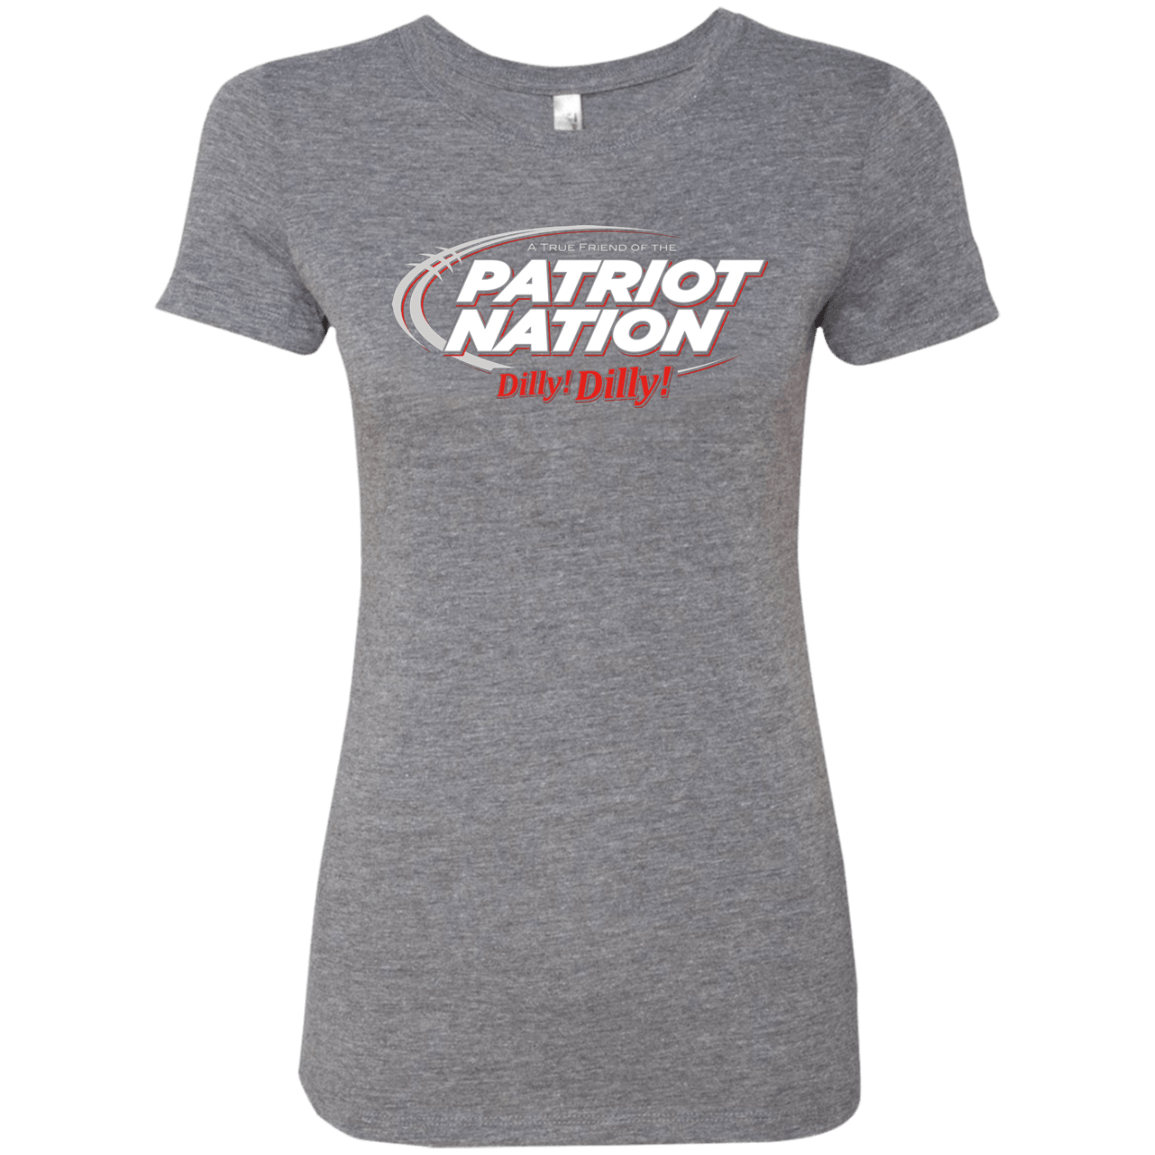 T-Shirts Premium Heather / Small Patriot Nation Dilly Dilly Women's Triblend T-Shirt